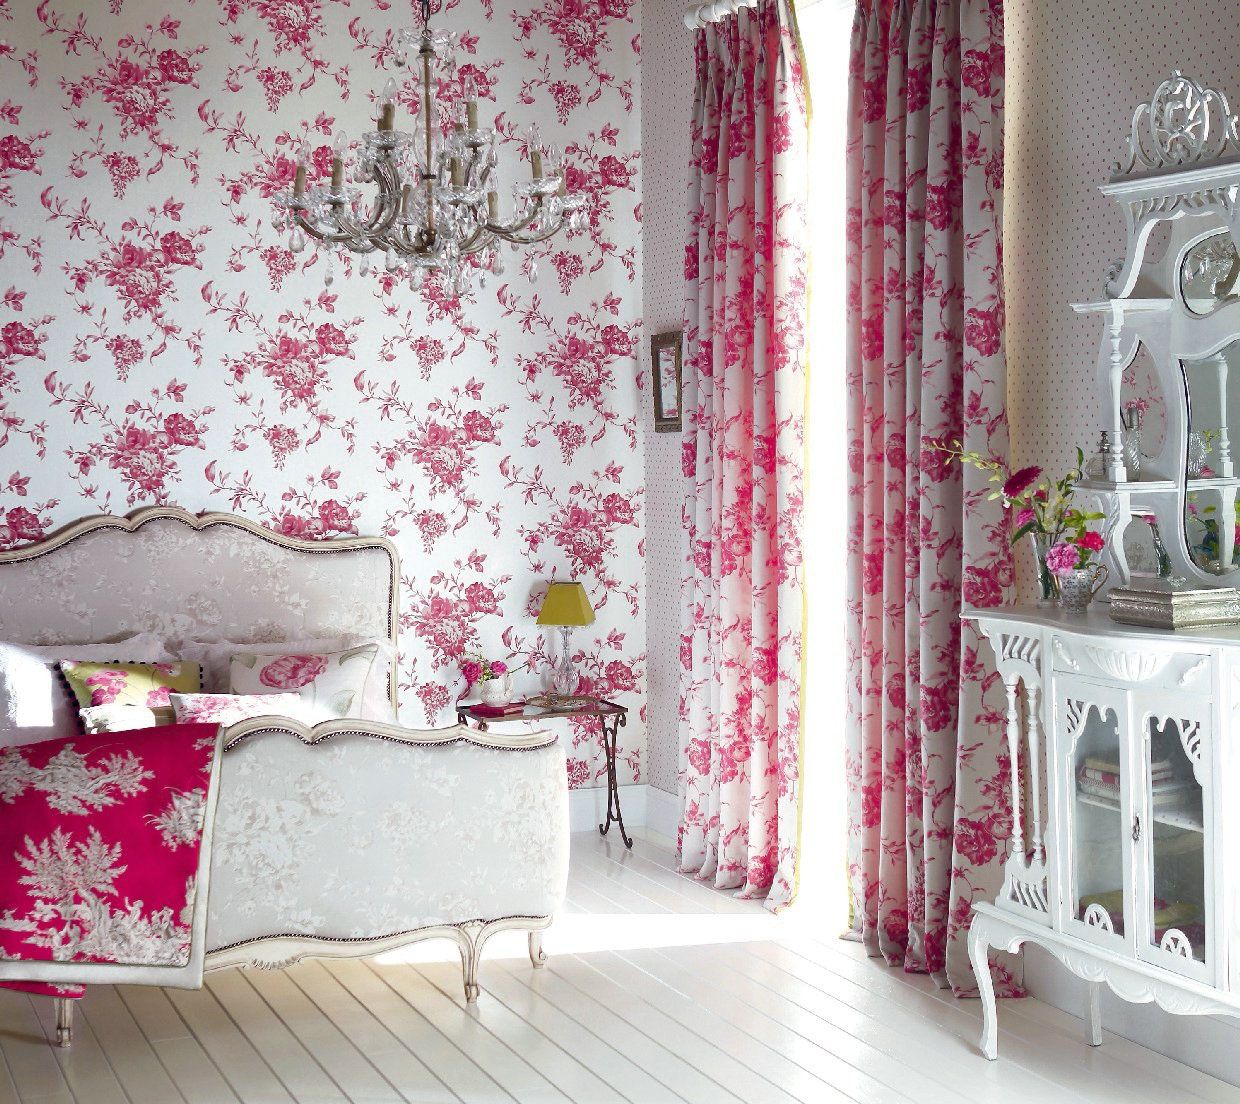 Bedroom patterned curtains